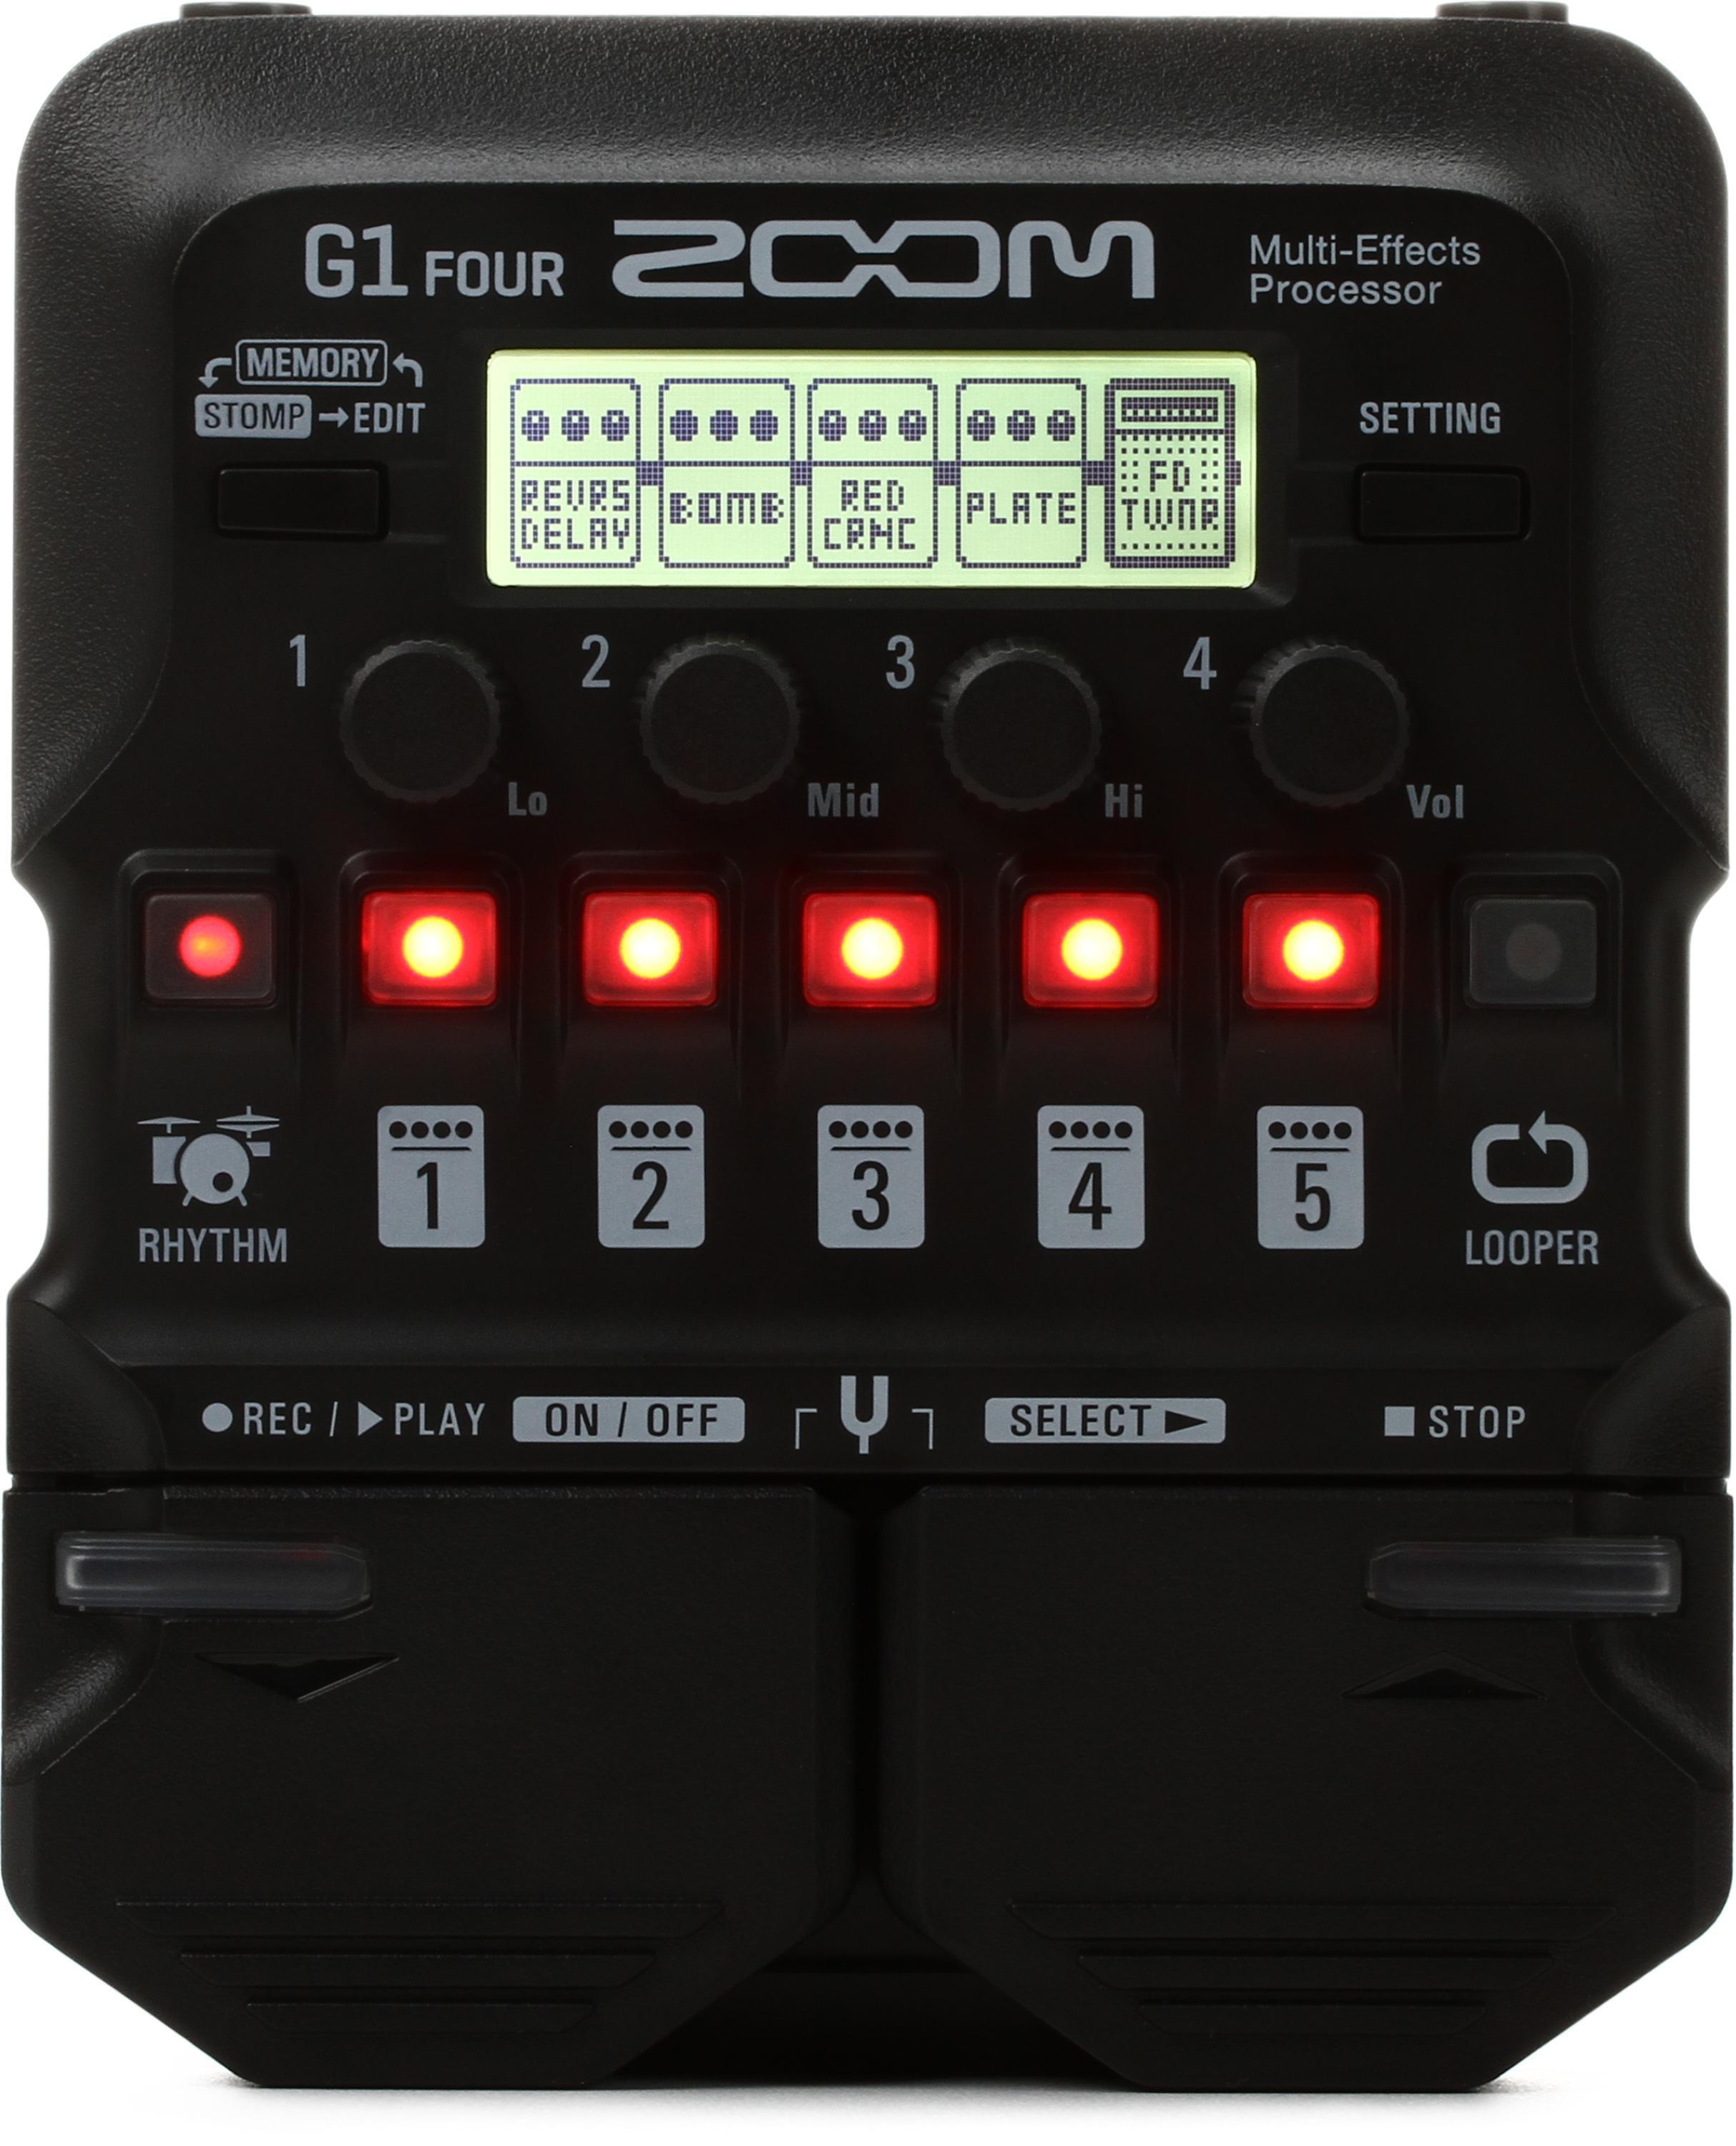 Zoom G1 Four Multi-effects Processor | Sweetwater